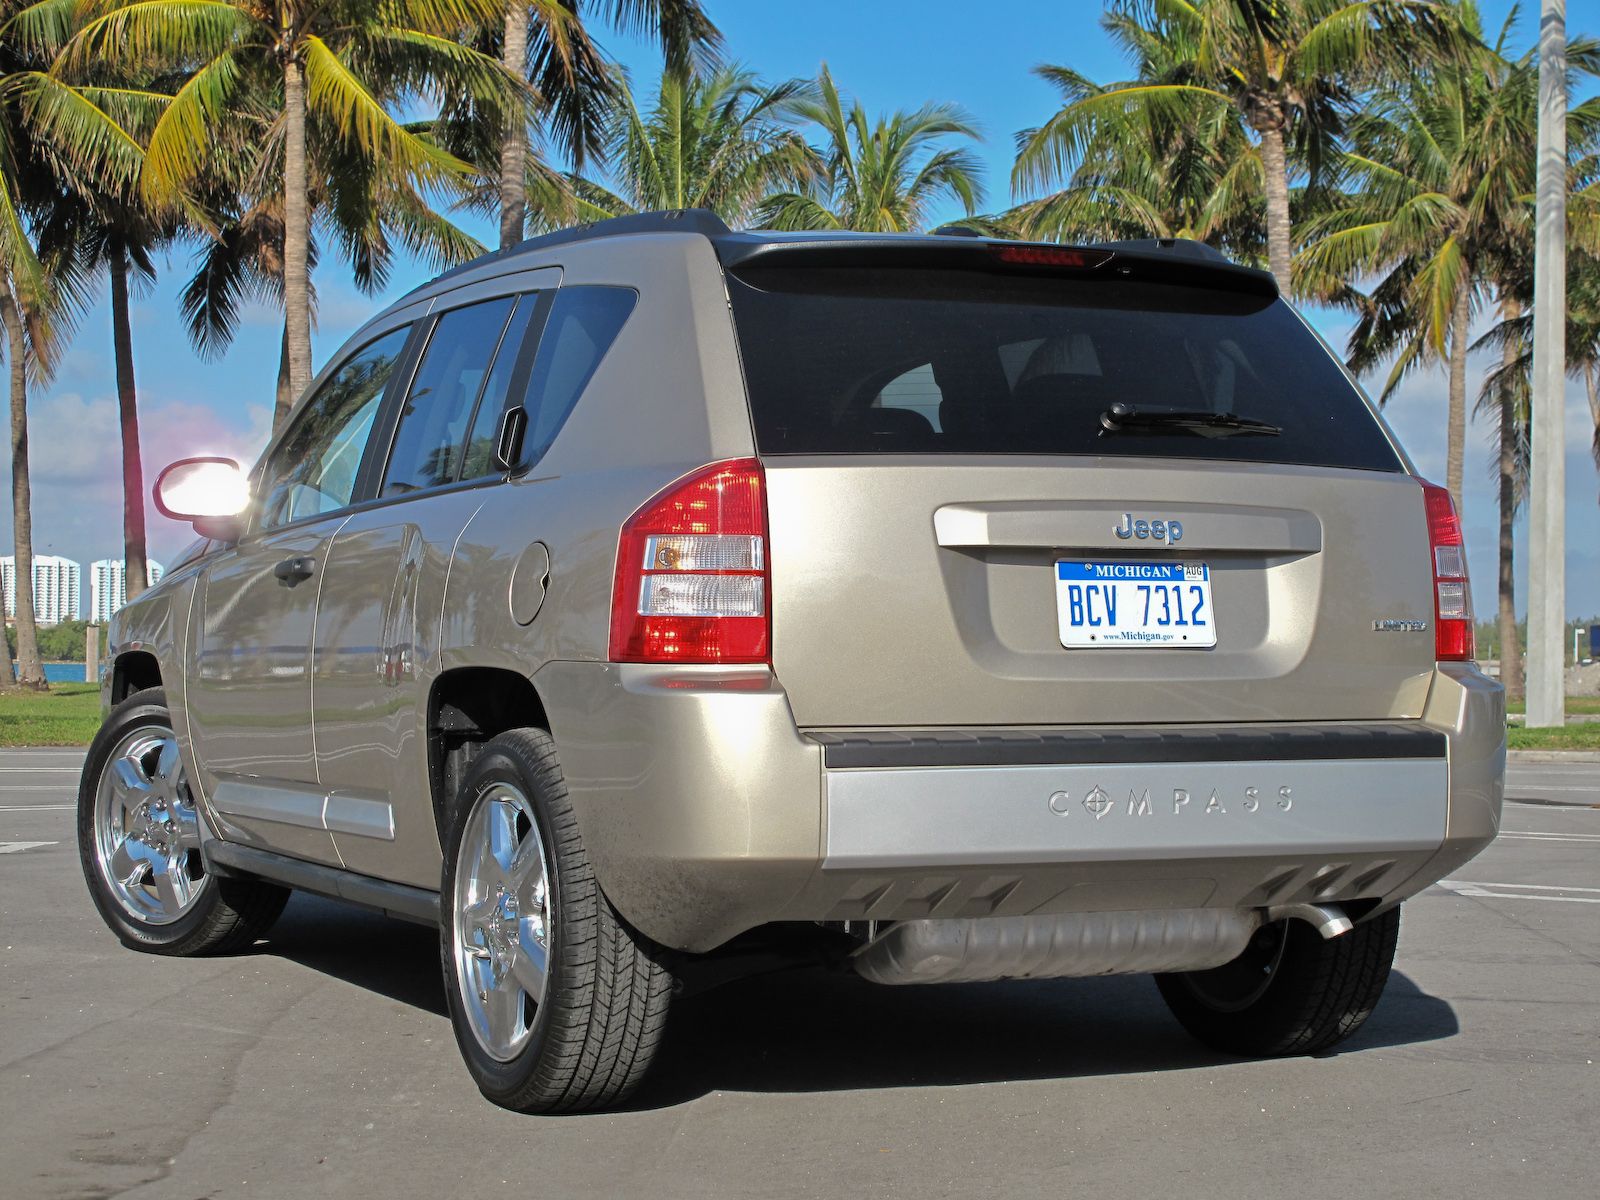 2009 Jeep Compass Limited